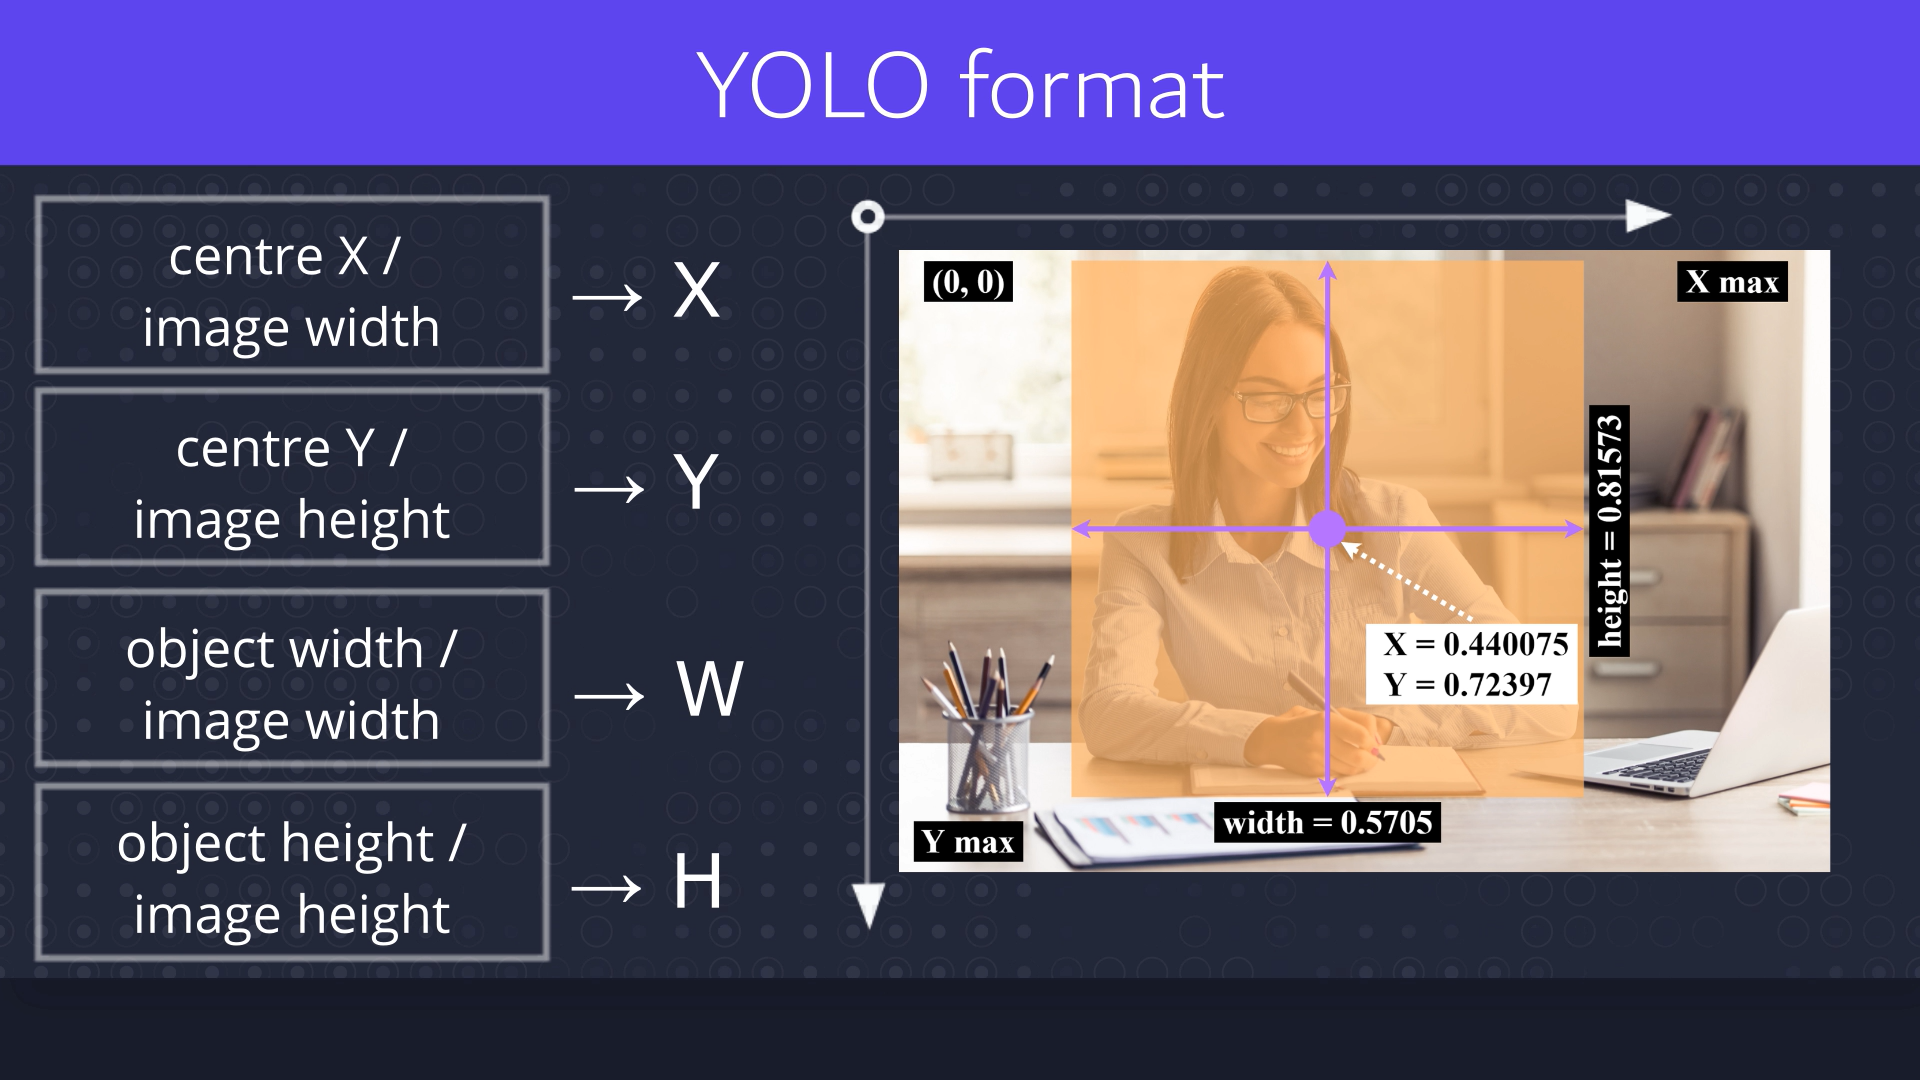 Equations and axes of the bounding boxes for YOLO format